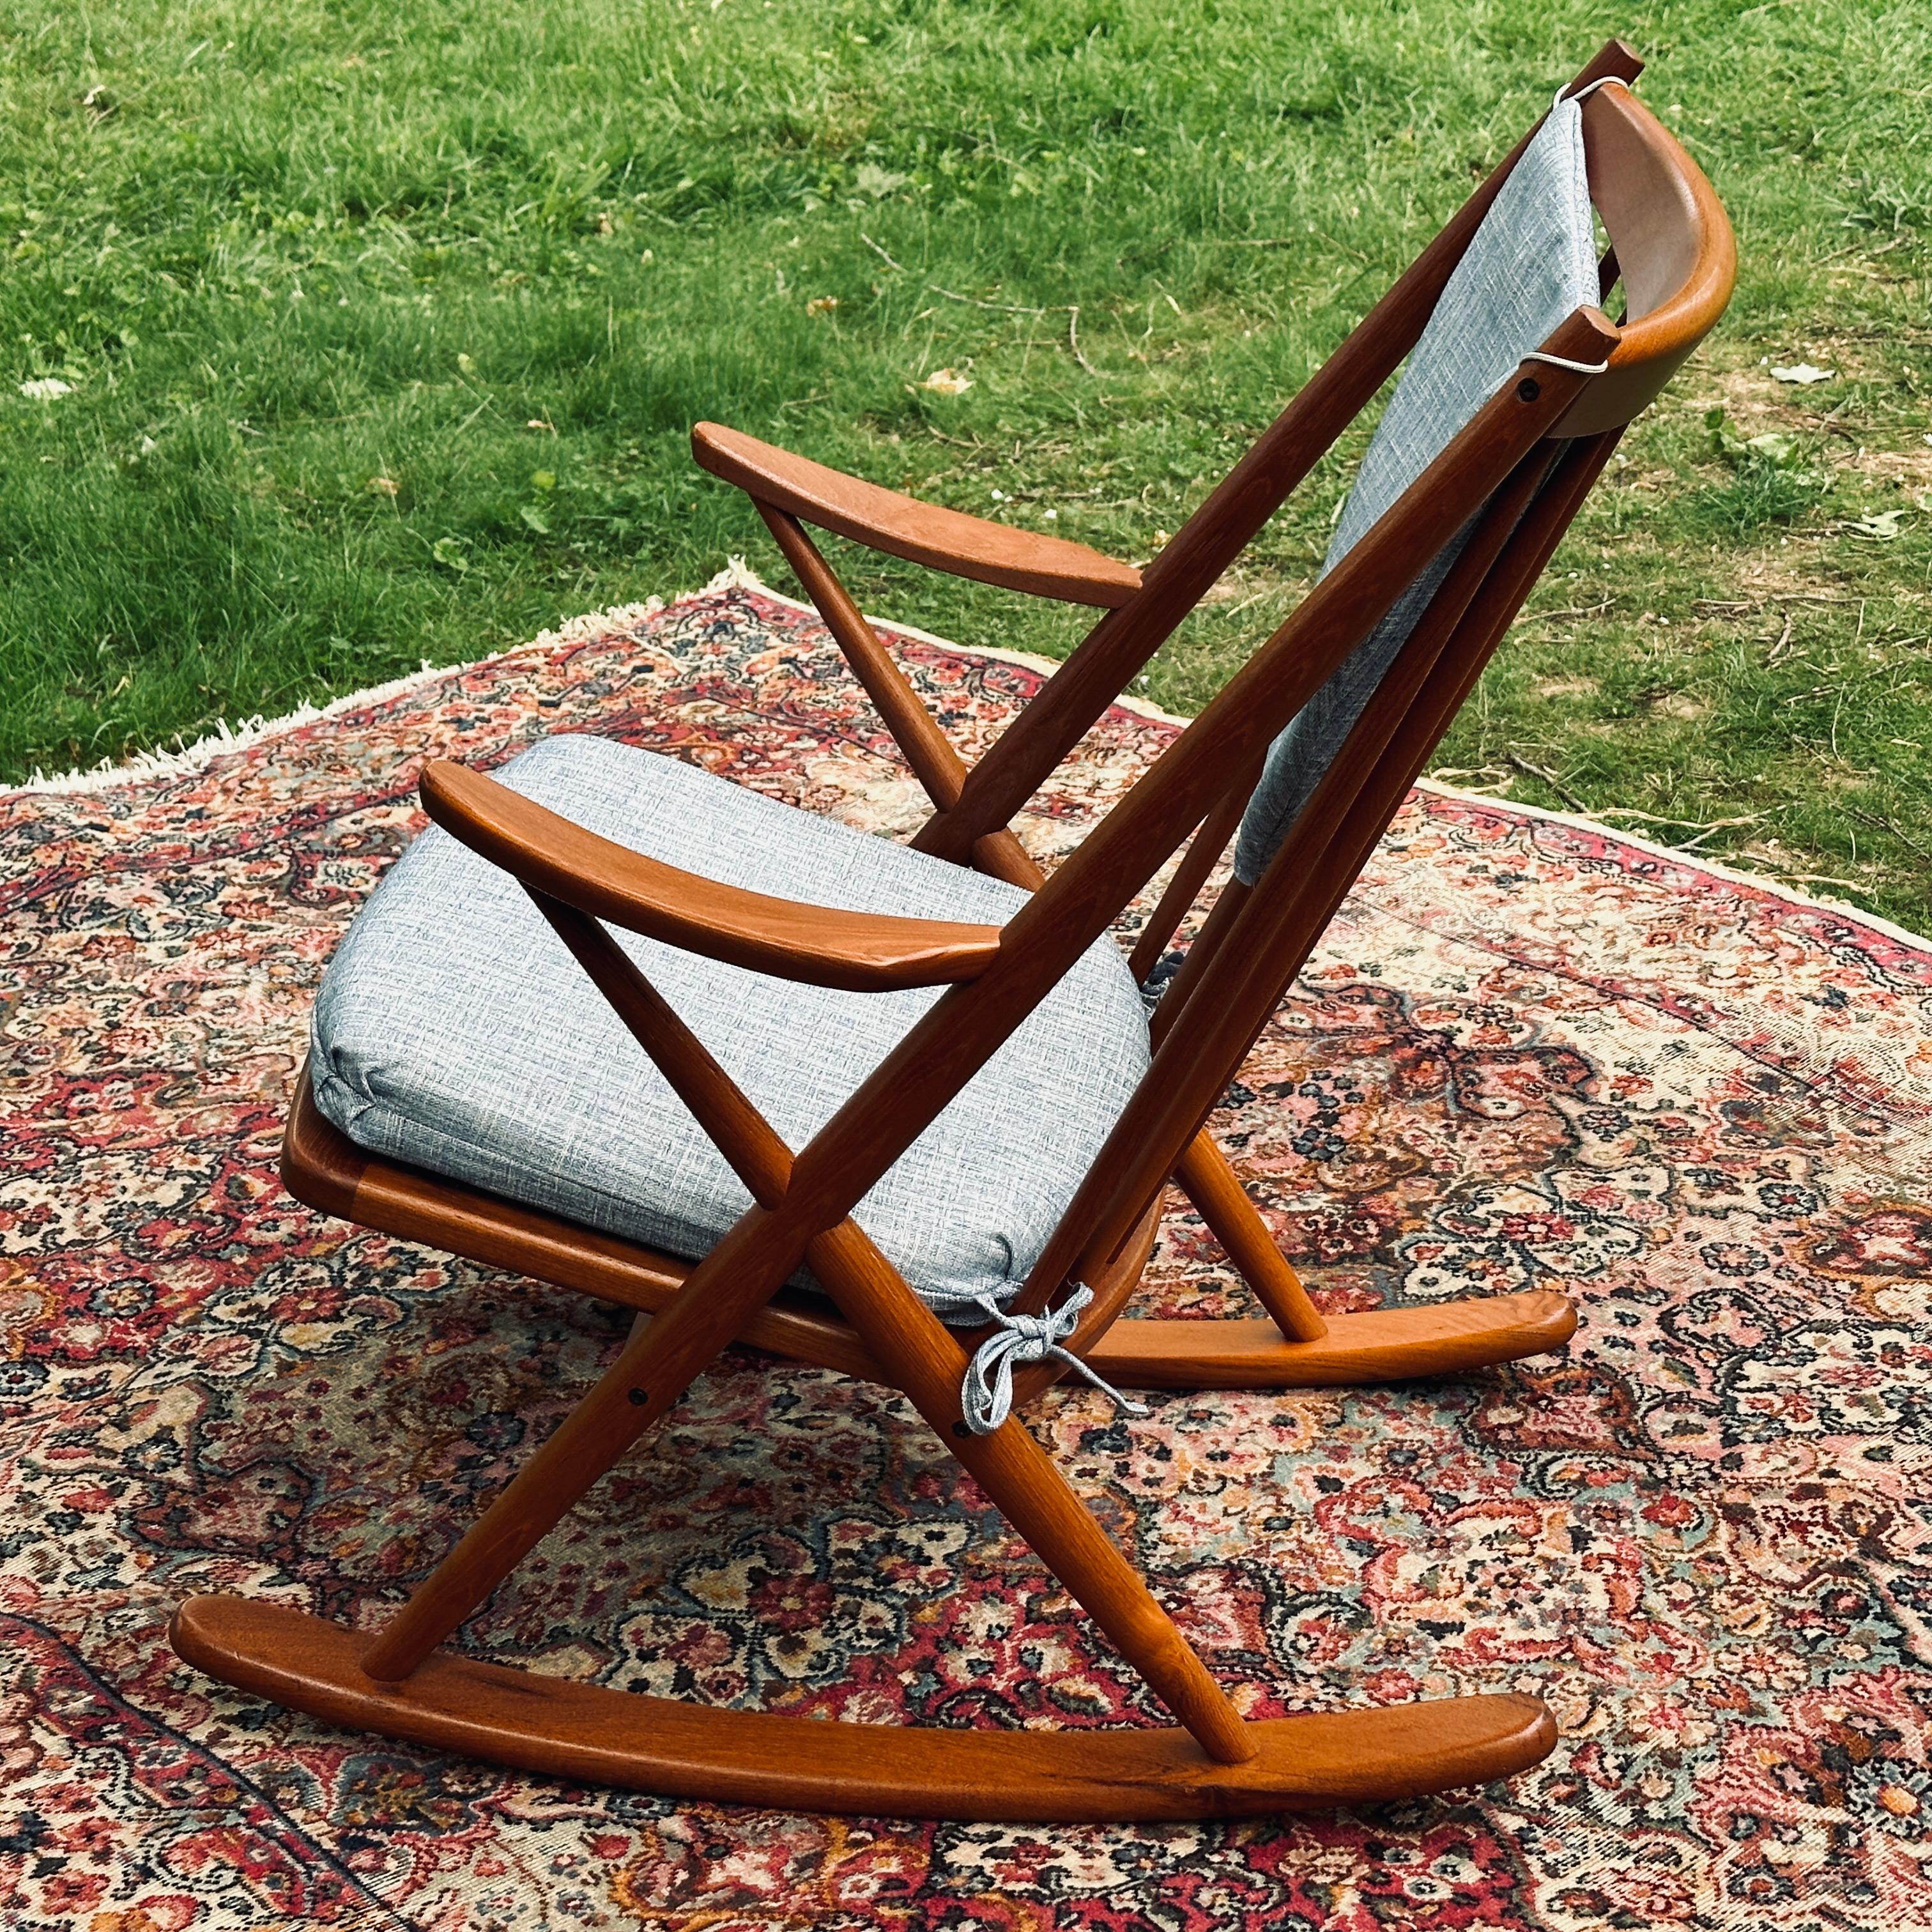 Restored Mid-Century Danish Modern Teak Rocker Rocking Chair In Good Condition For Sale In West Chester, PA